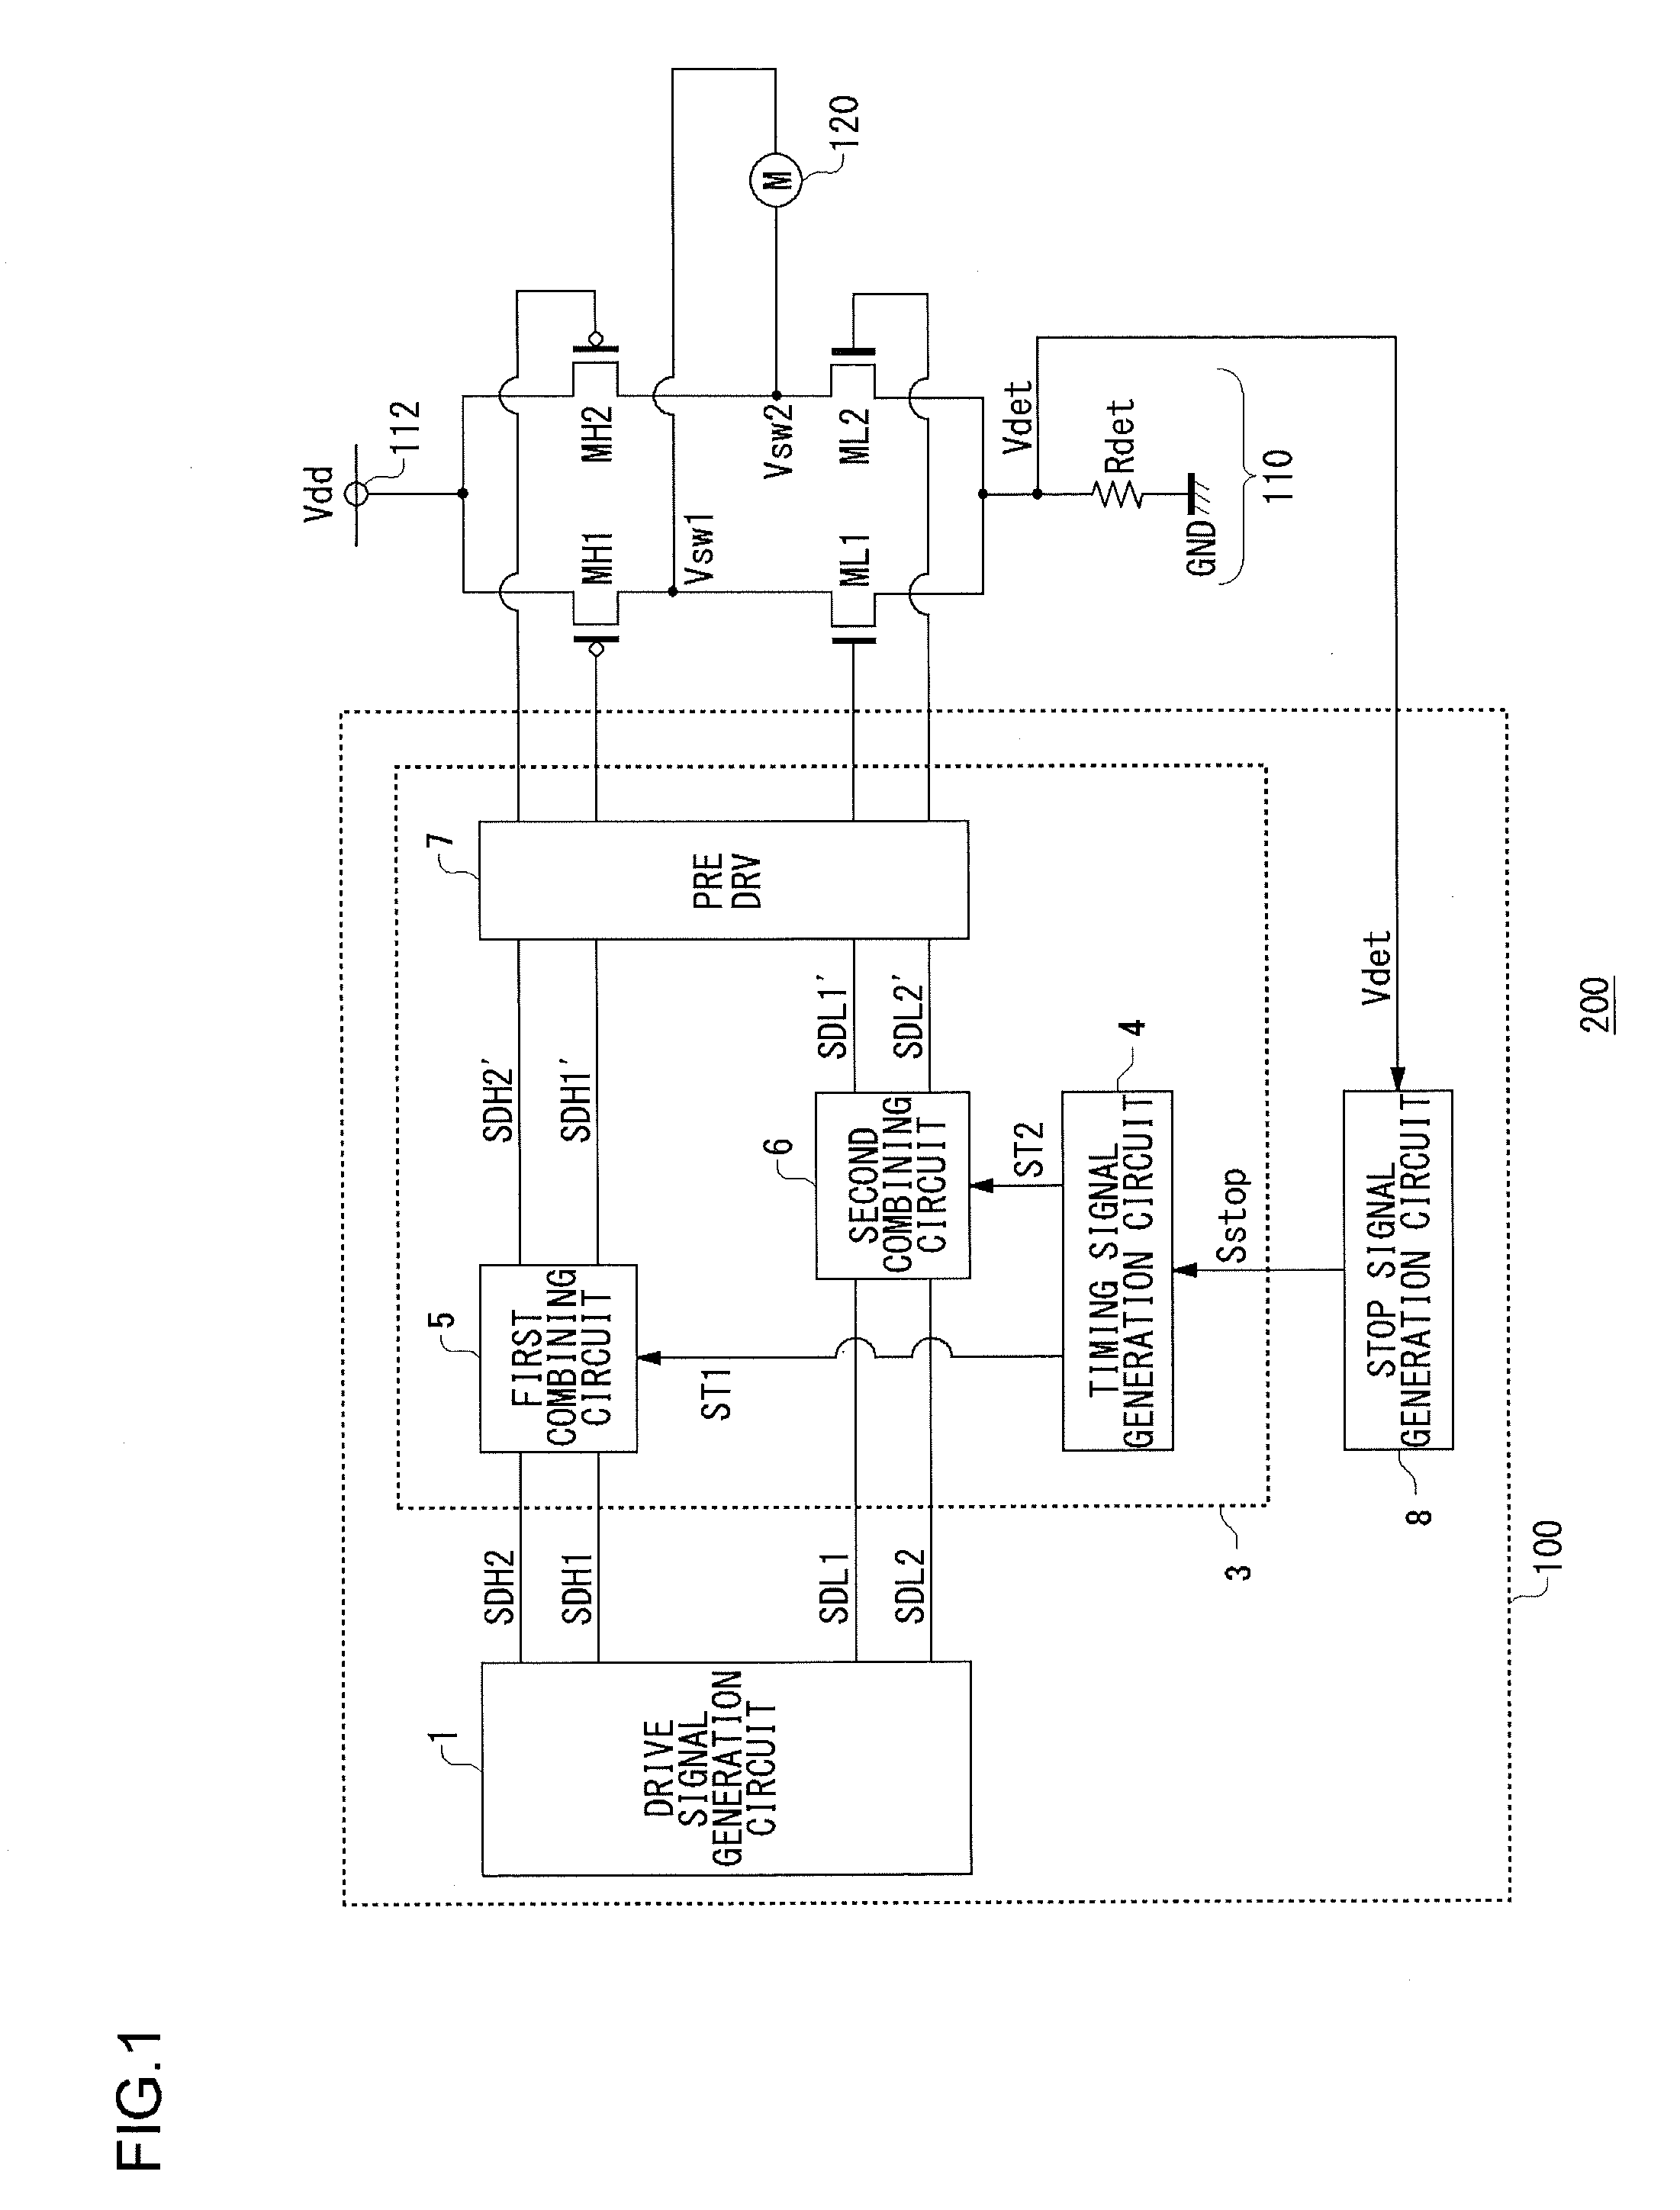 Motor drive circuit, method, and cooling device using the same